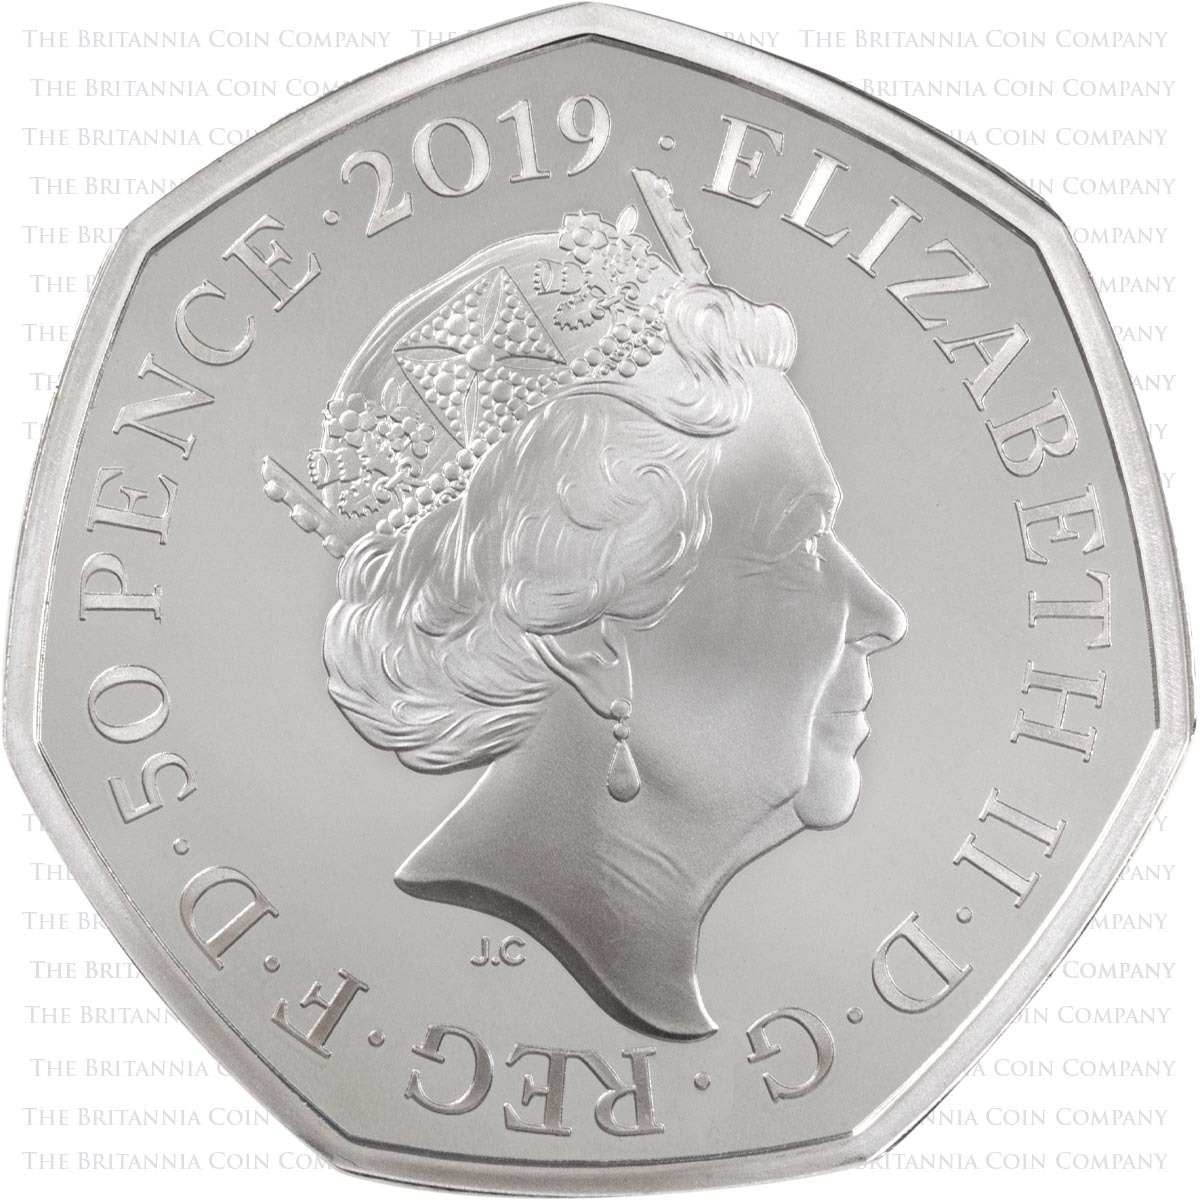 UK19PRSP 2019 Beatrix Potter Peter Rabbit Fifty Pence Colour Printed Silver Proof Coin Obverse